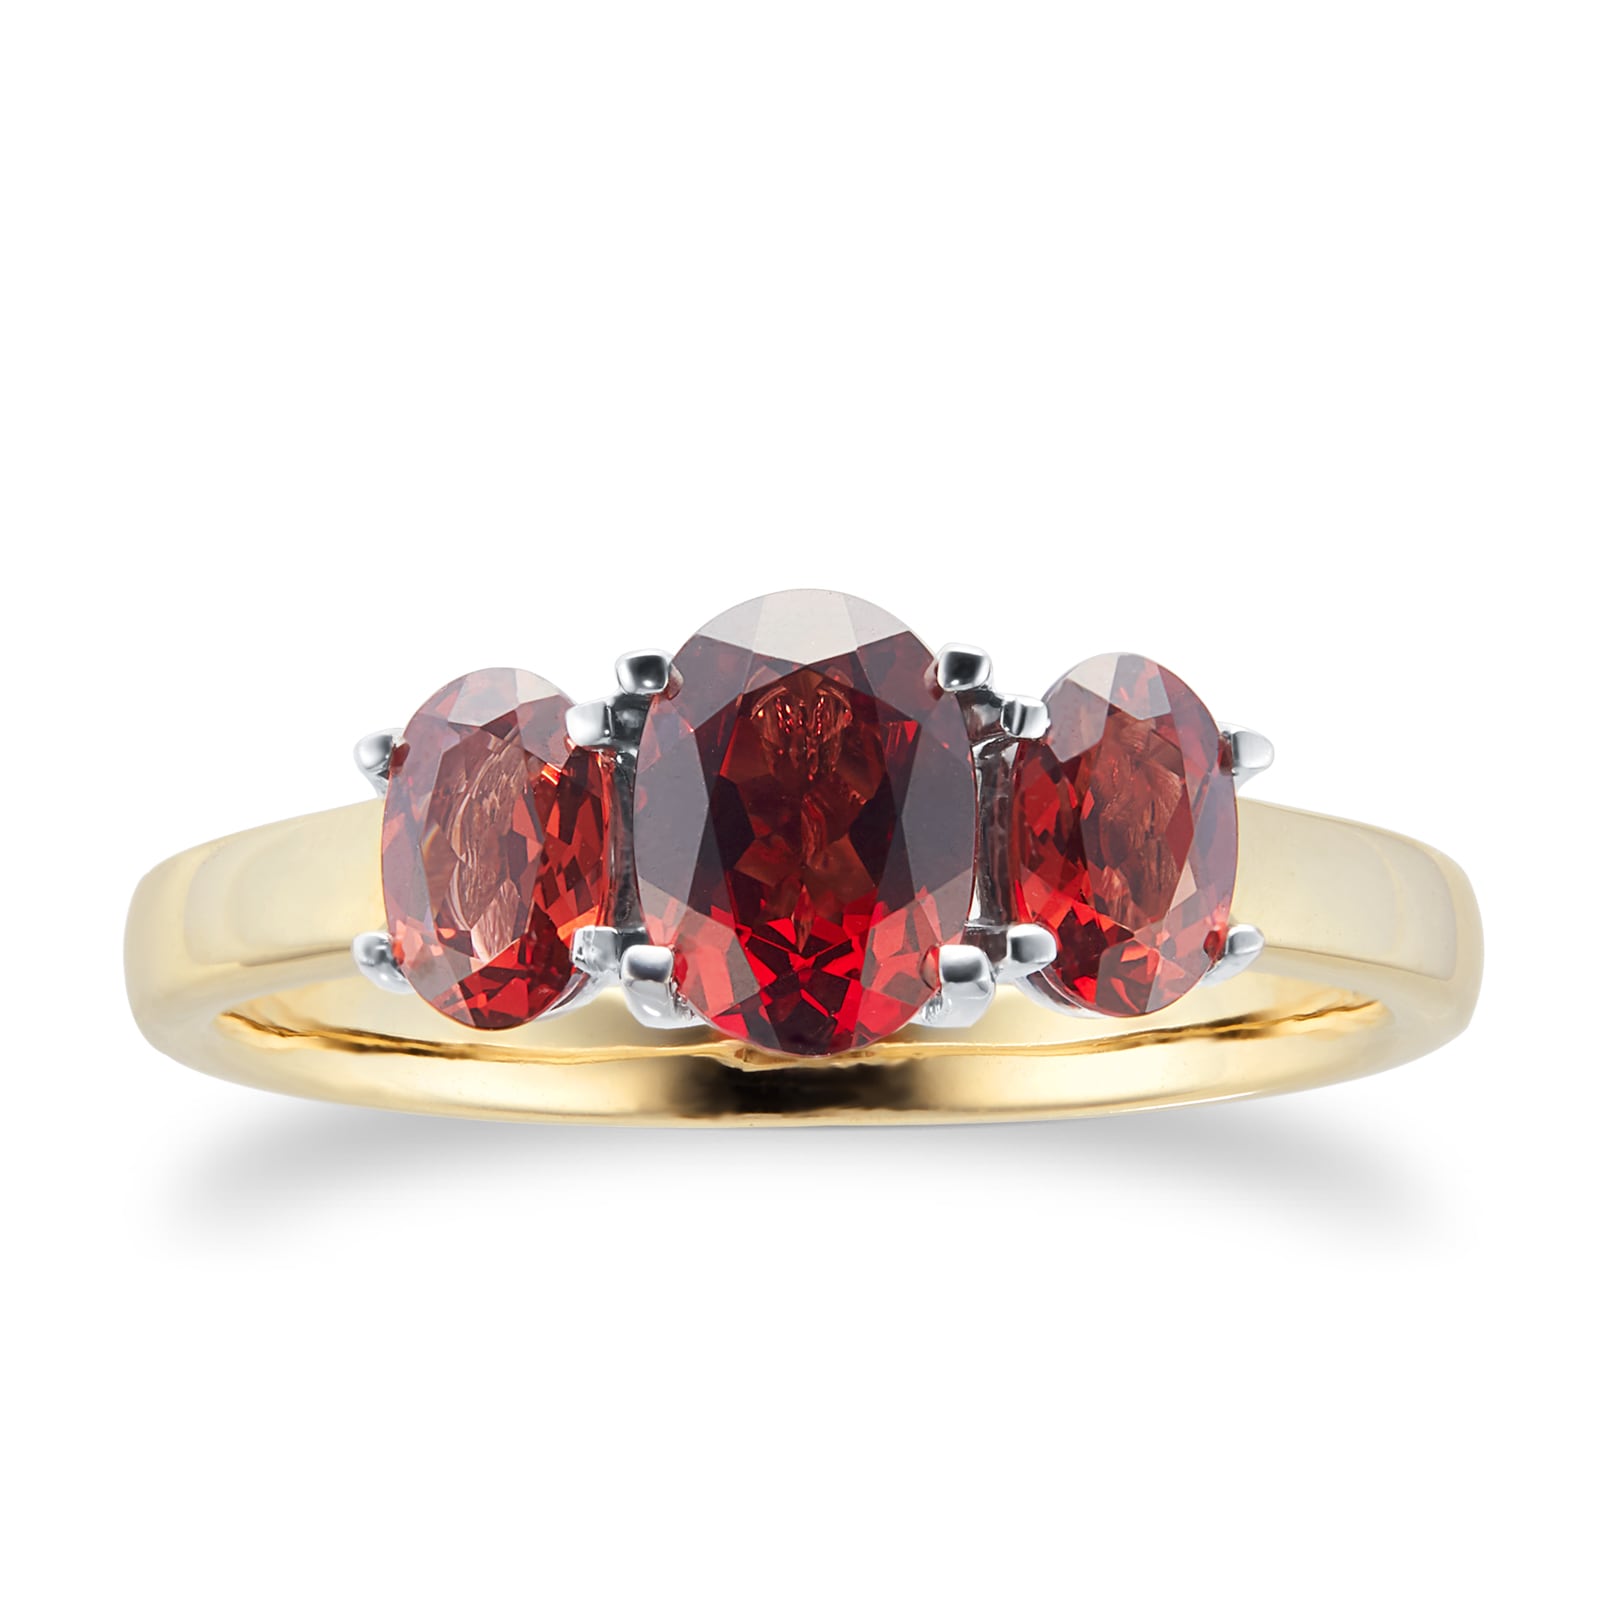 9ct Yellow and White Gold 3 Stone Garnet Ring - Ring Size I